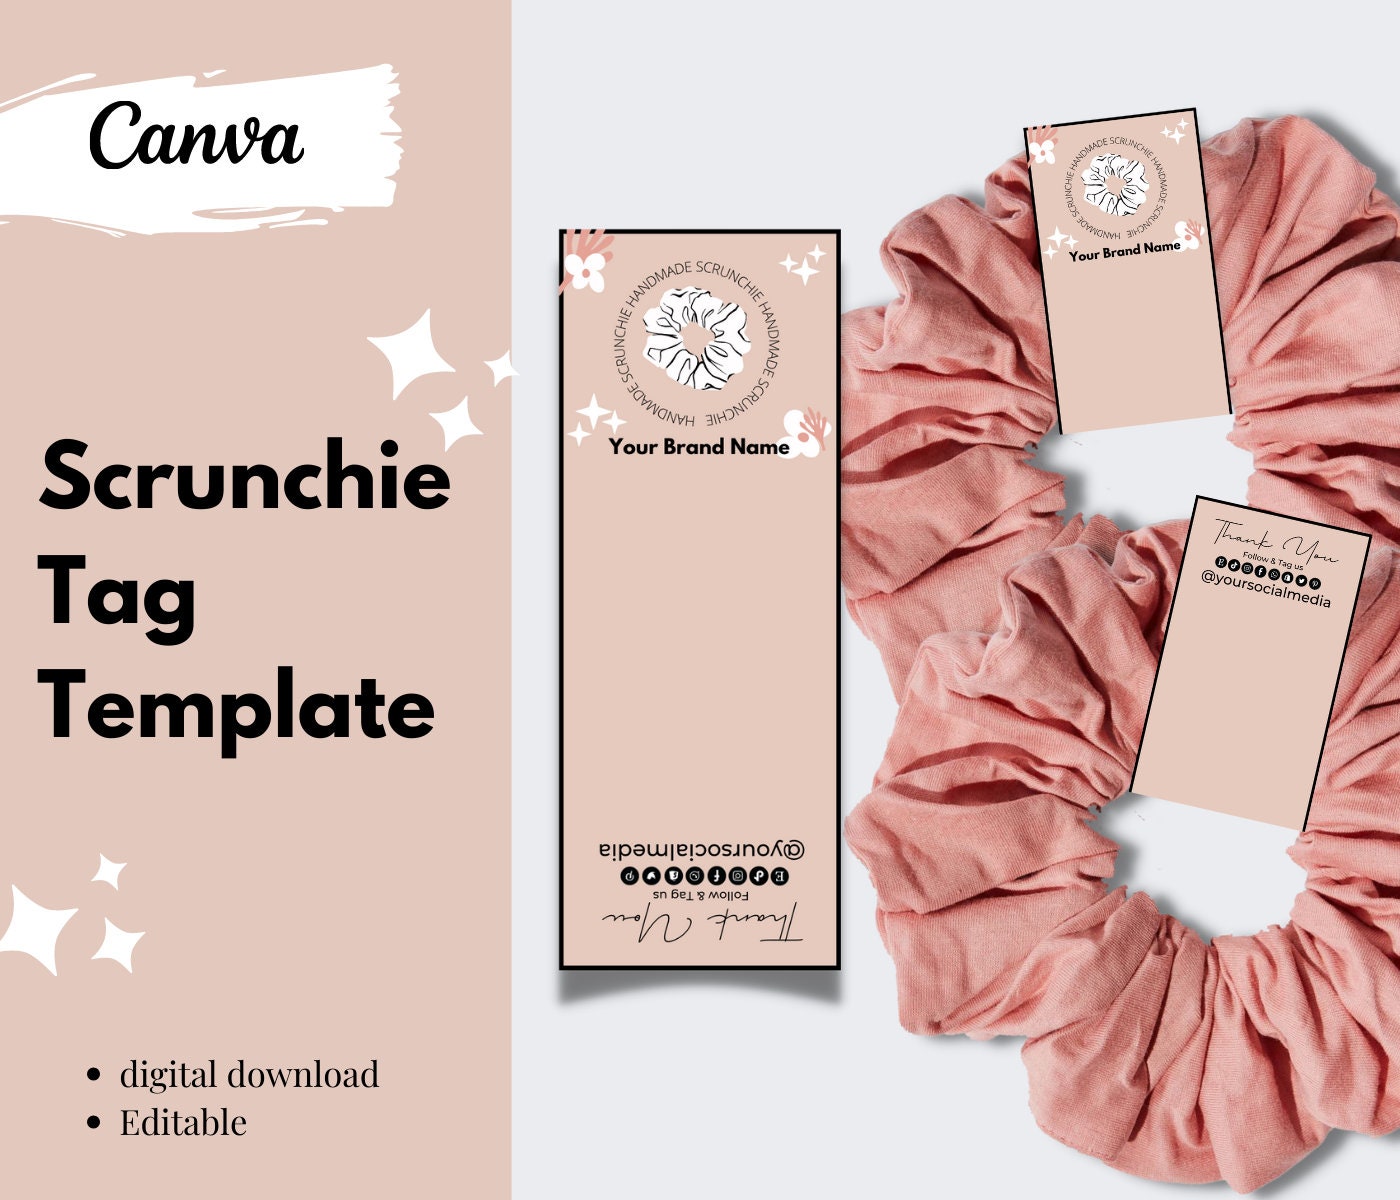 Scrunchie Tag Canva Templates Printable Scrunchie Hang Tags Etsy France